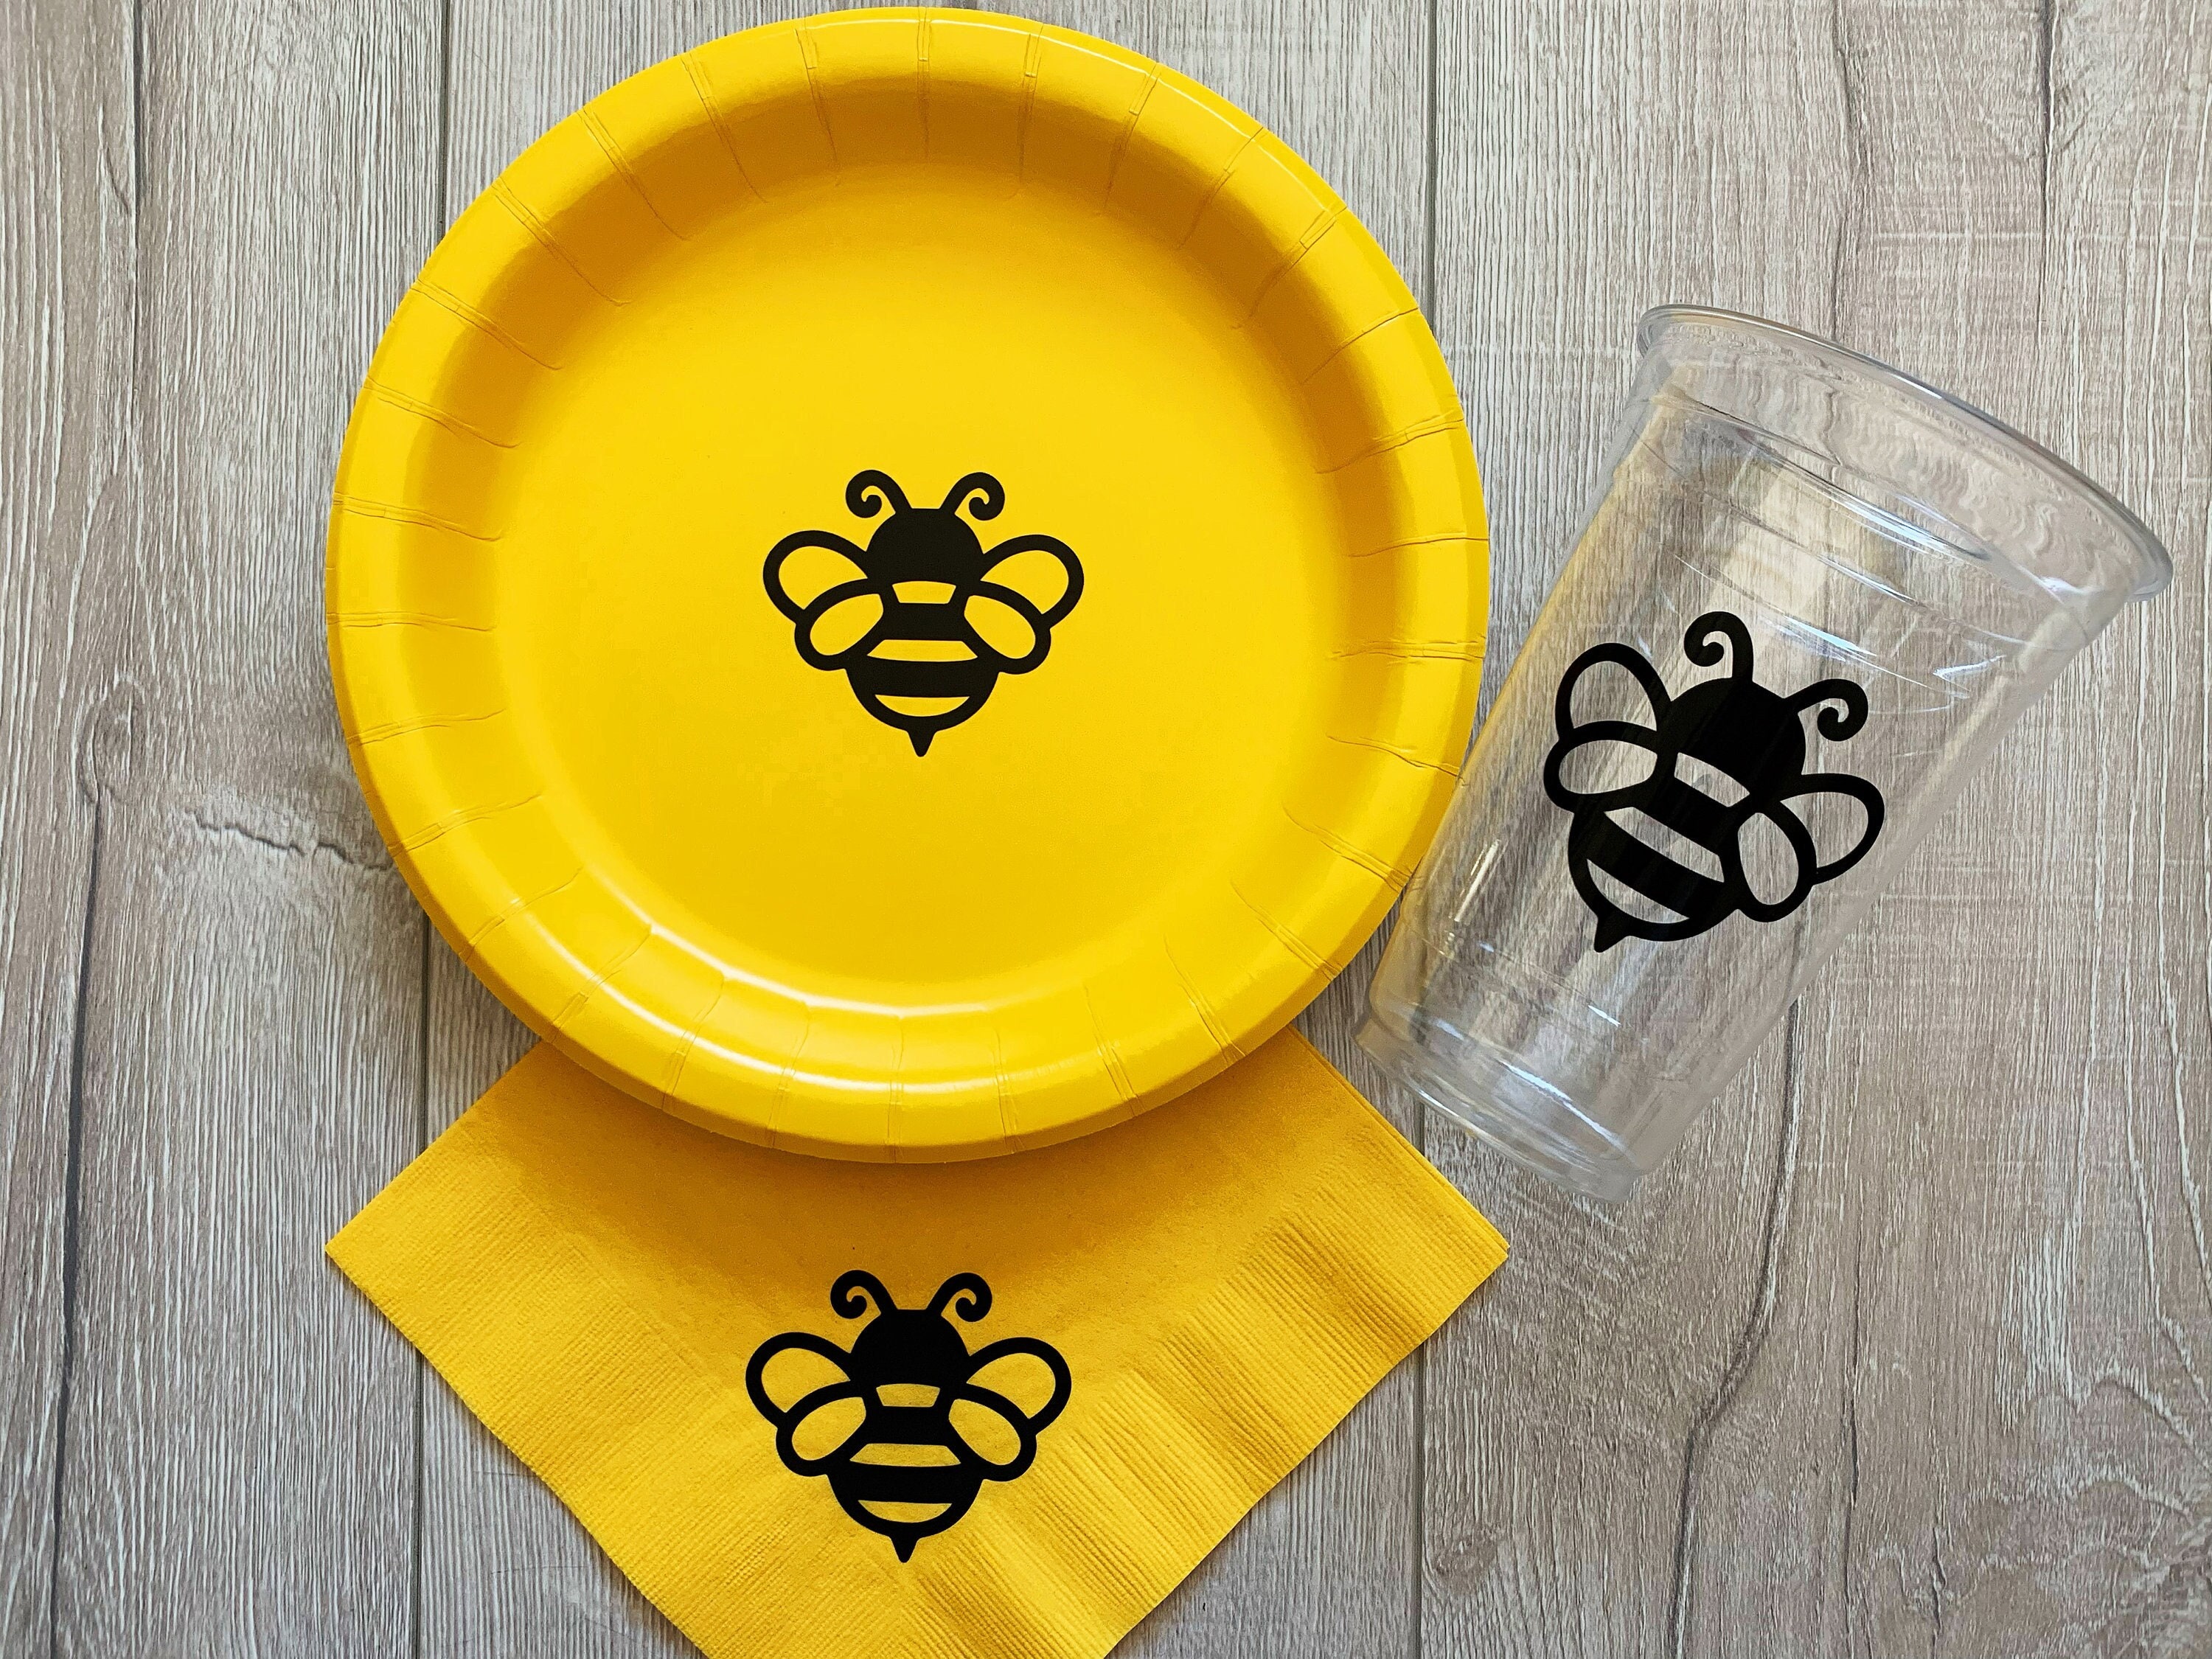 KEFAN Bee Birthday Party Decorations, Bee Party Tableware Supplies, Plates,  Cup, Napkin, Cutlery, Tablecloth, Straws for Children Birthday Baby Shower